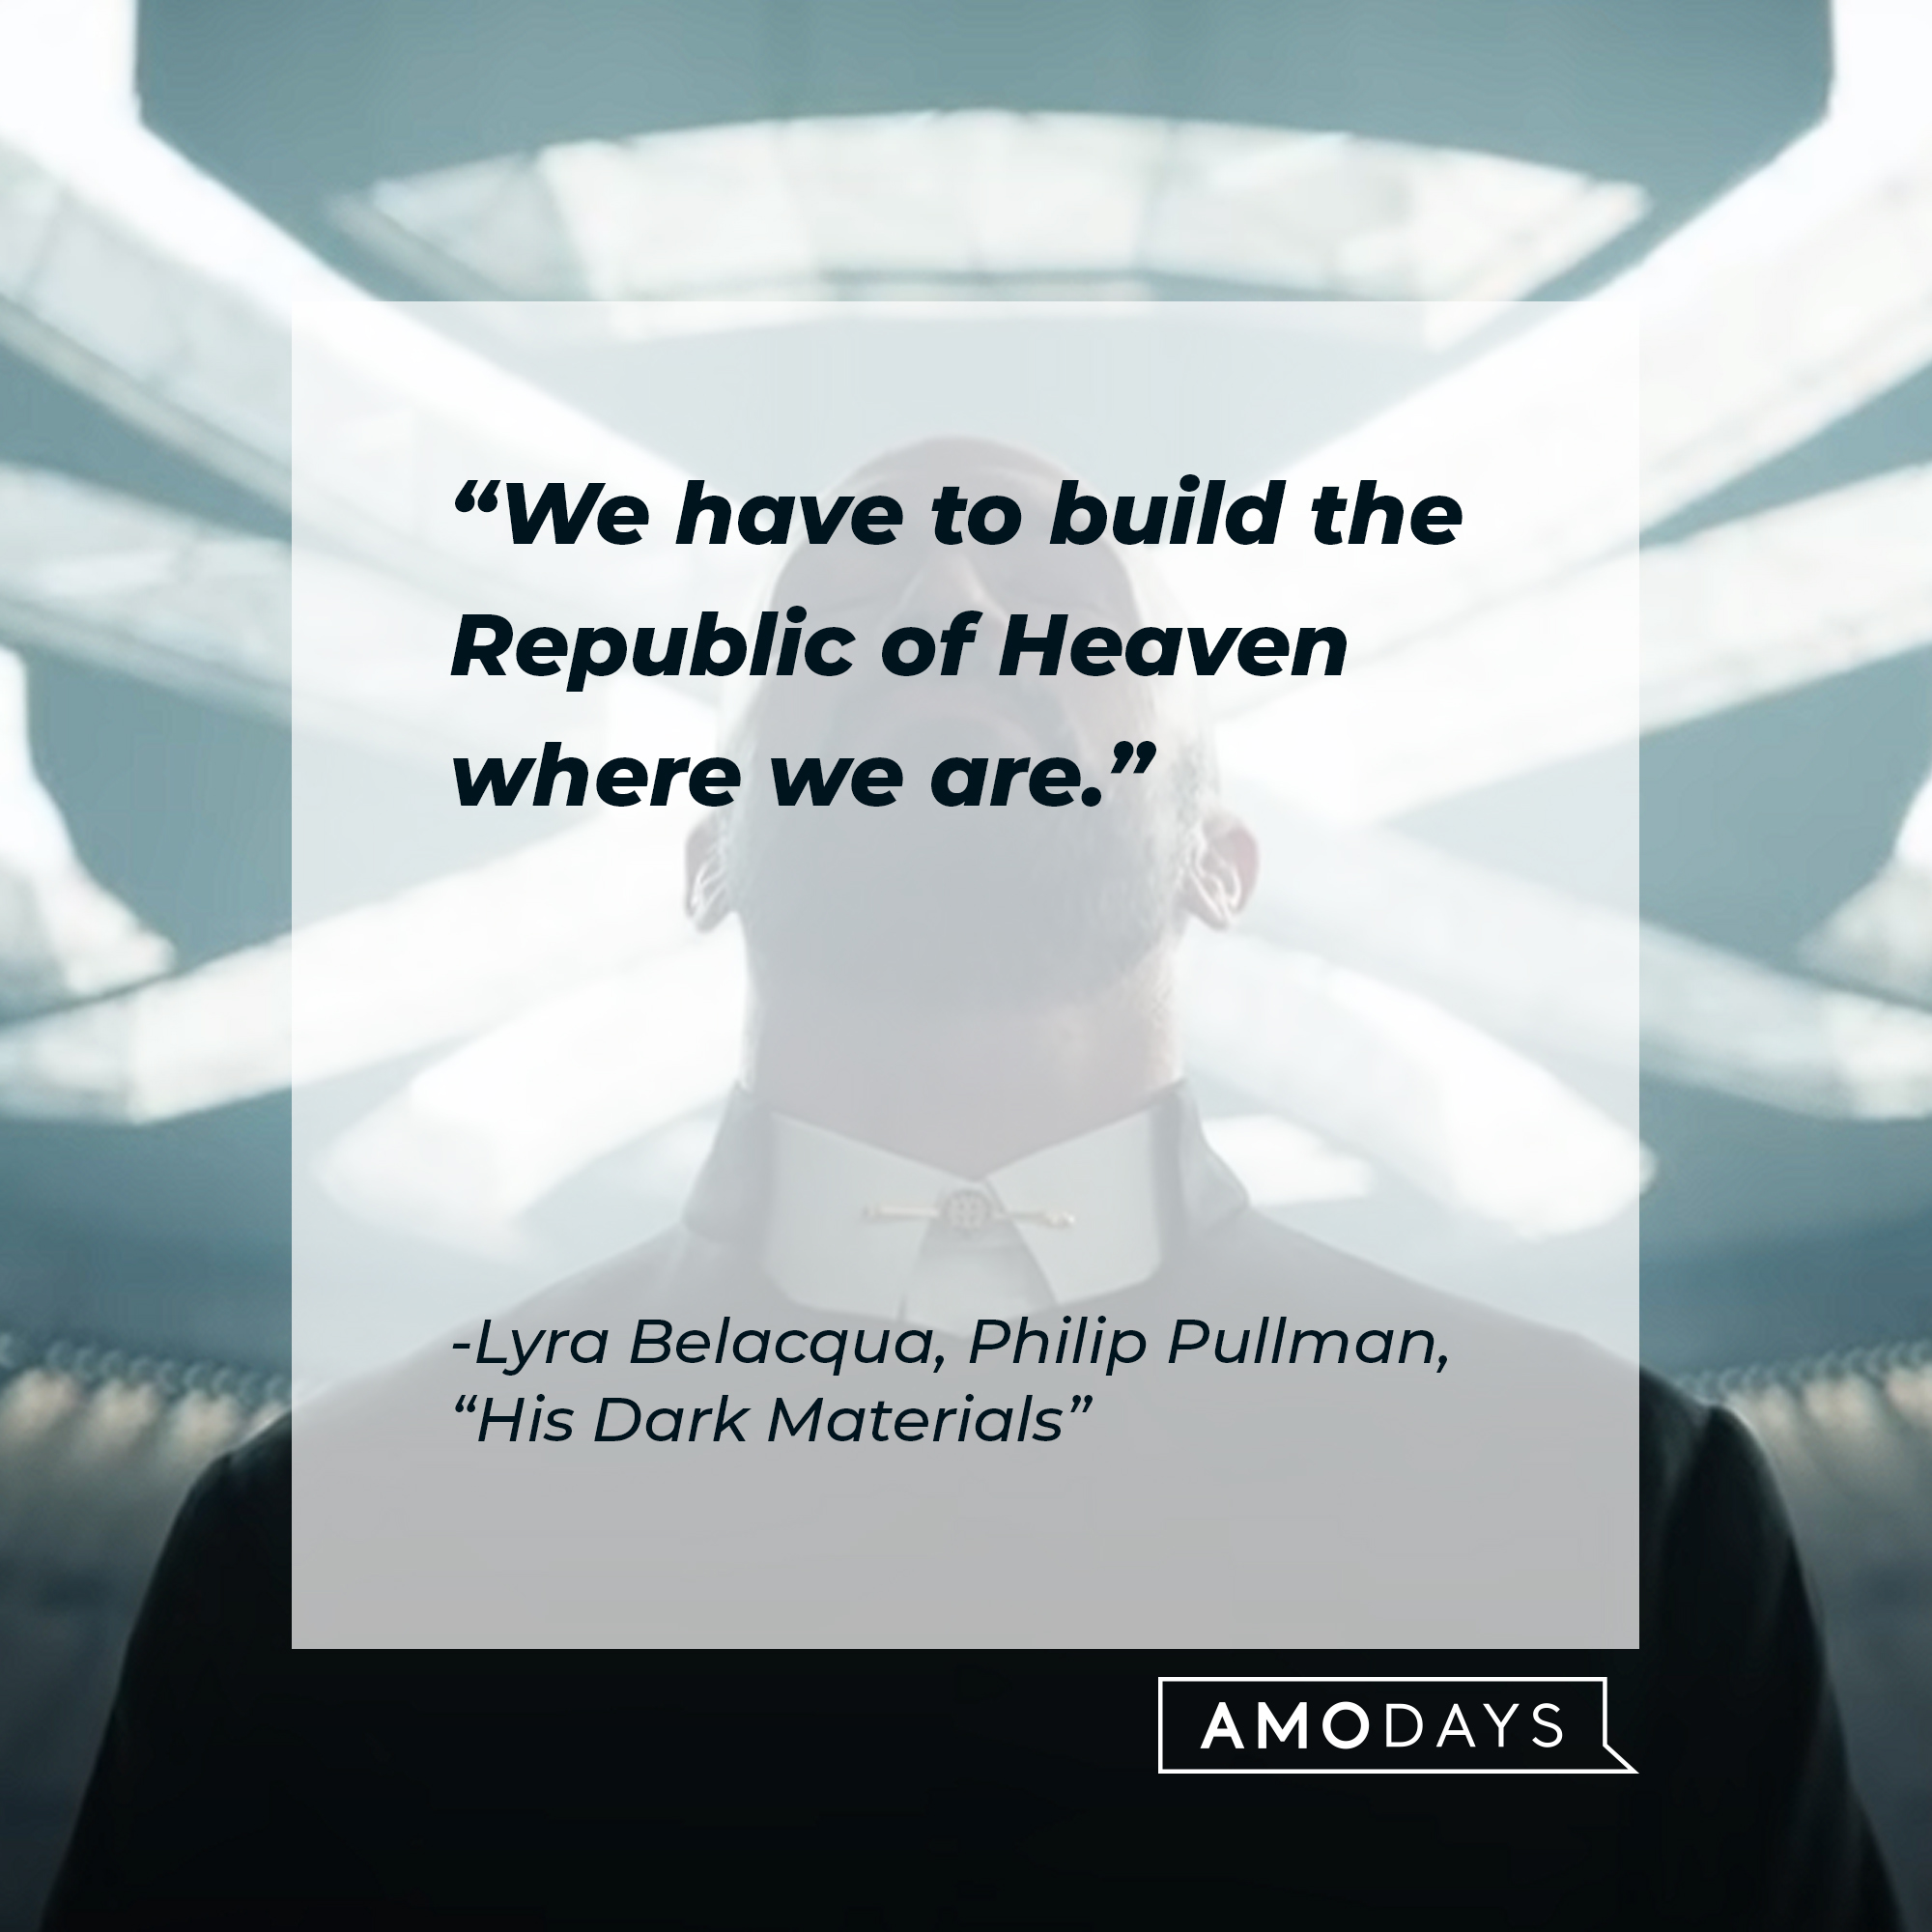 An image of a character from Philip Pullman’s "His Dark Materials" with Lyra Belacqua’s quote: “We have to build the Republic of Heaven where we are.” | Source: youtube.com/HBO